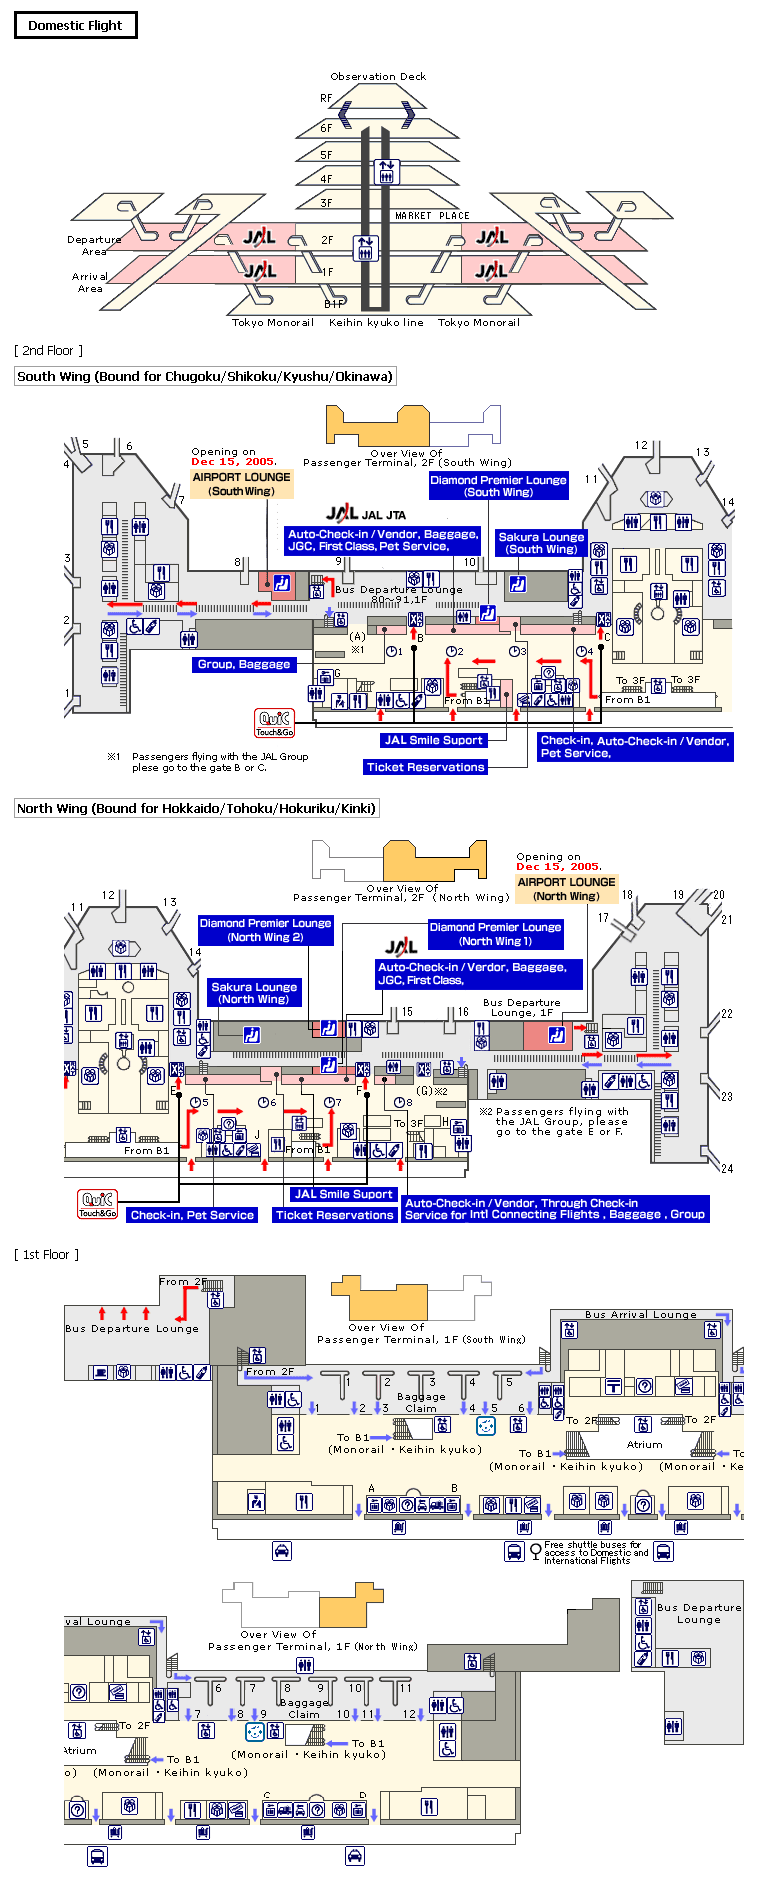 Domestic terminals layout of airlines JAL in Tokyo Haneda International Airport